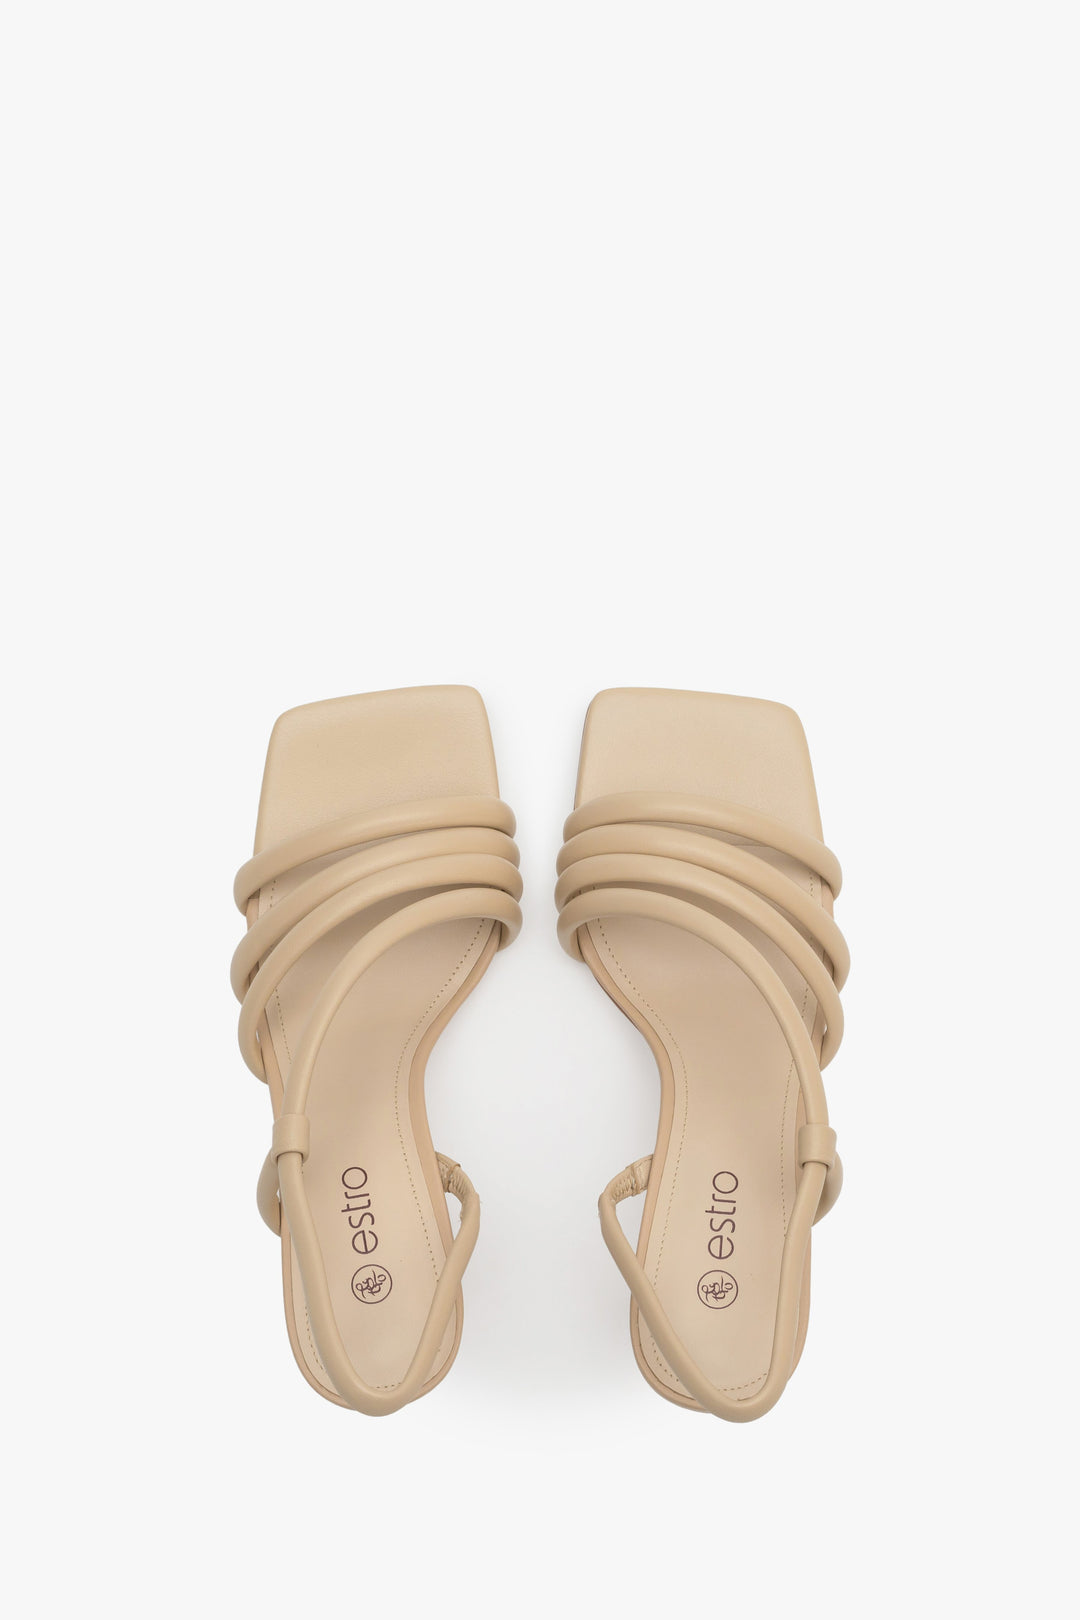 Heeled women's strappy sandals made of natural leather in beige by Estro.